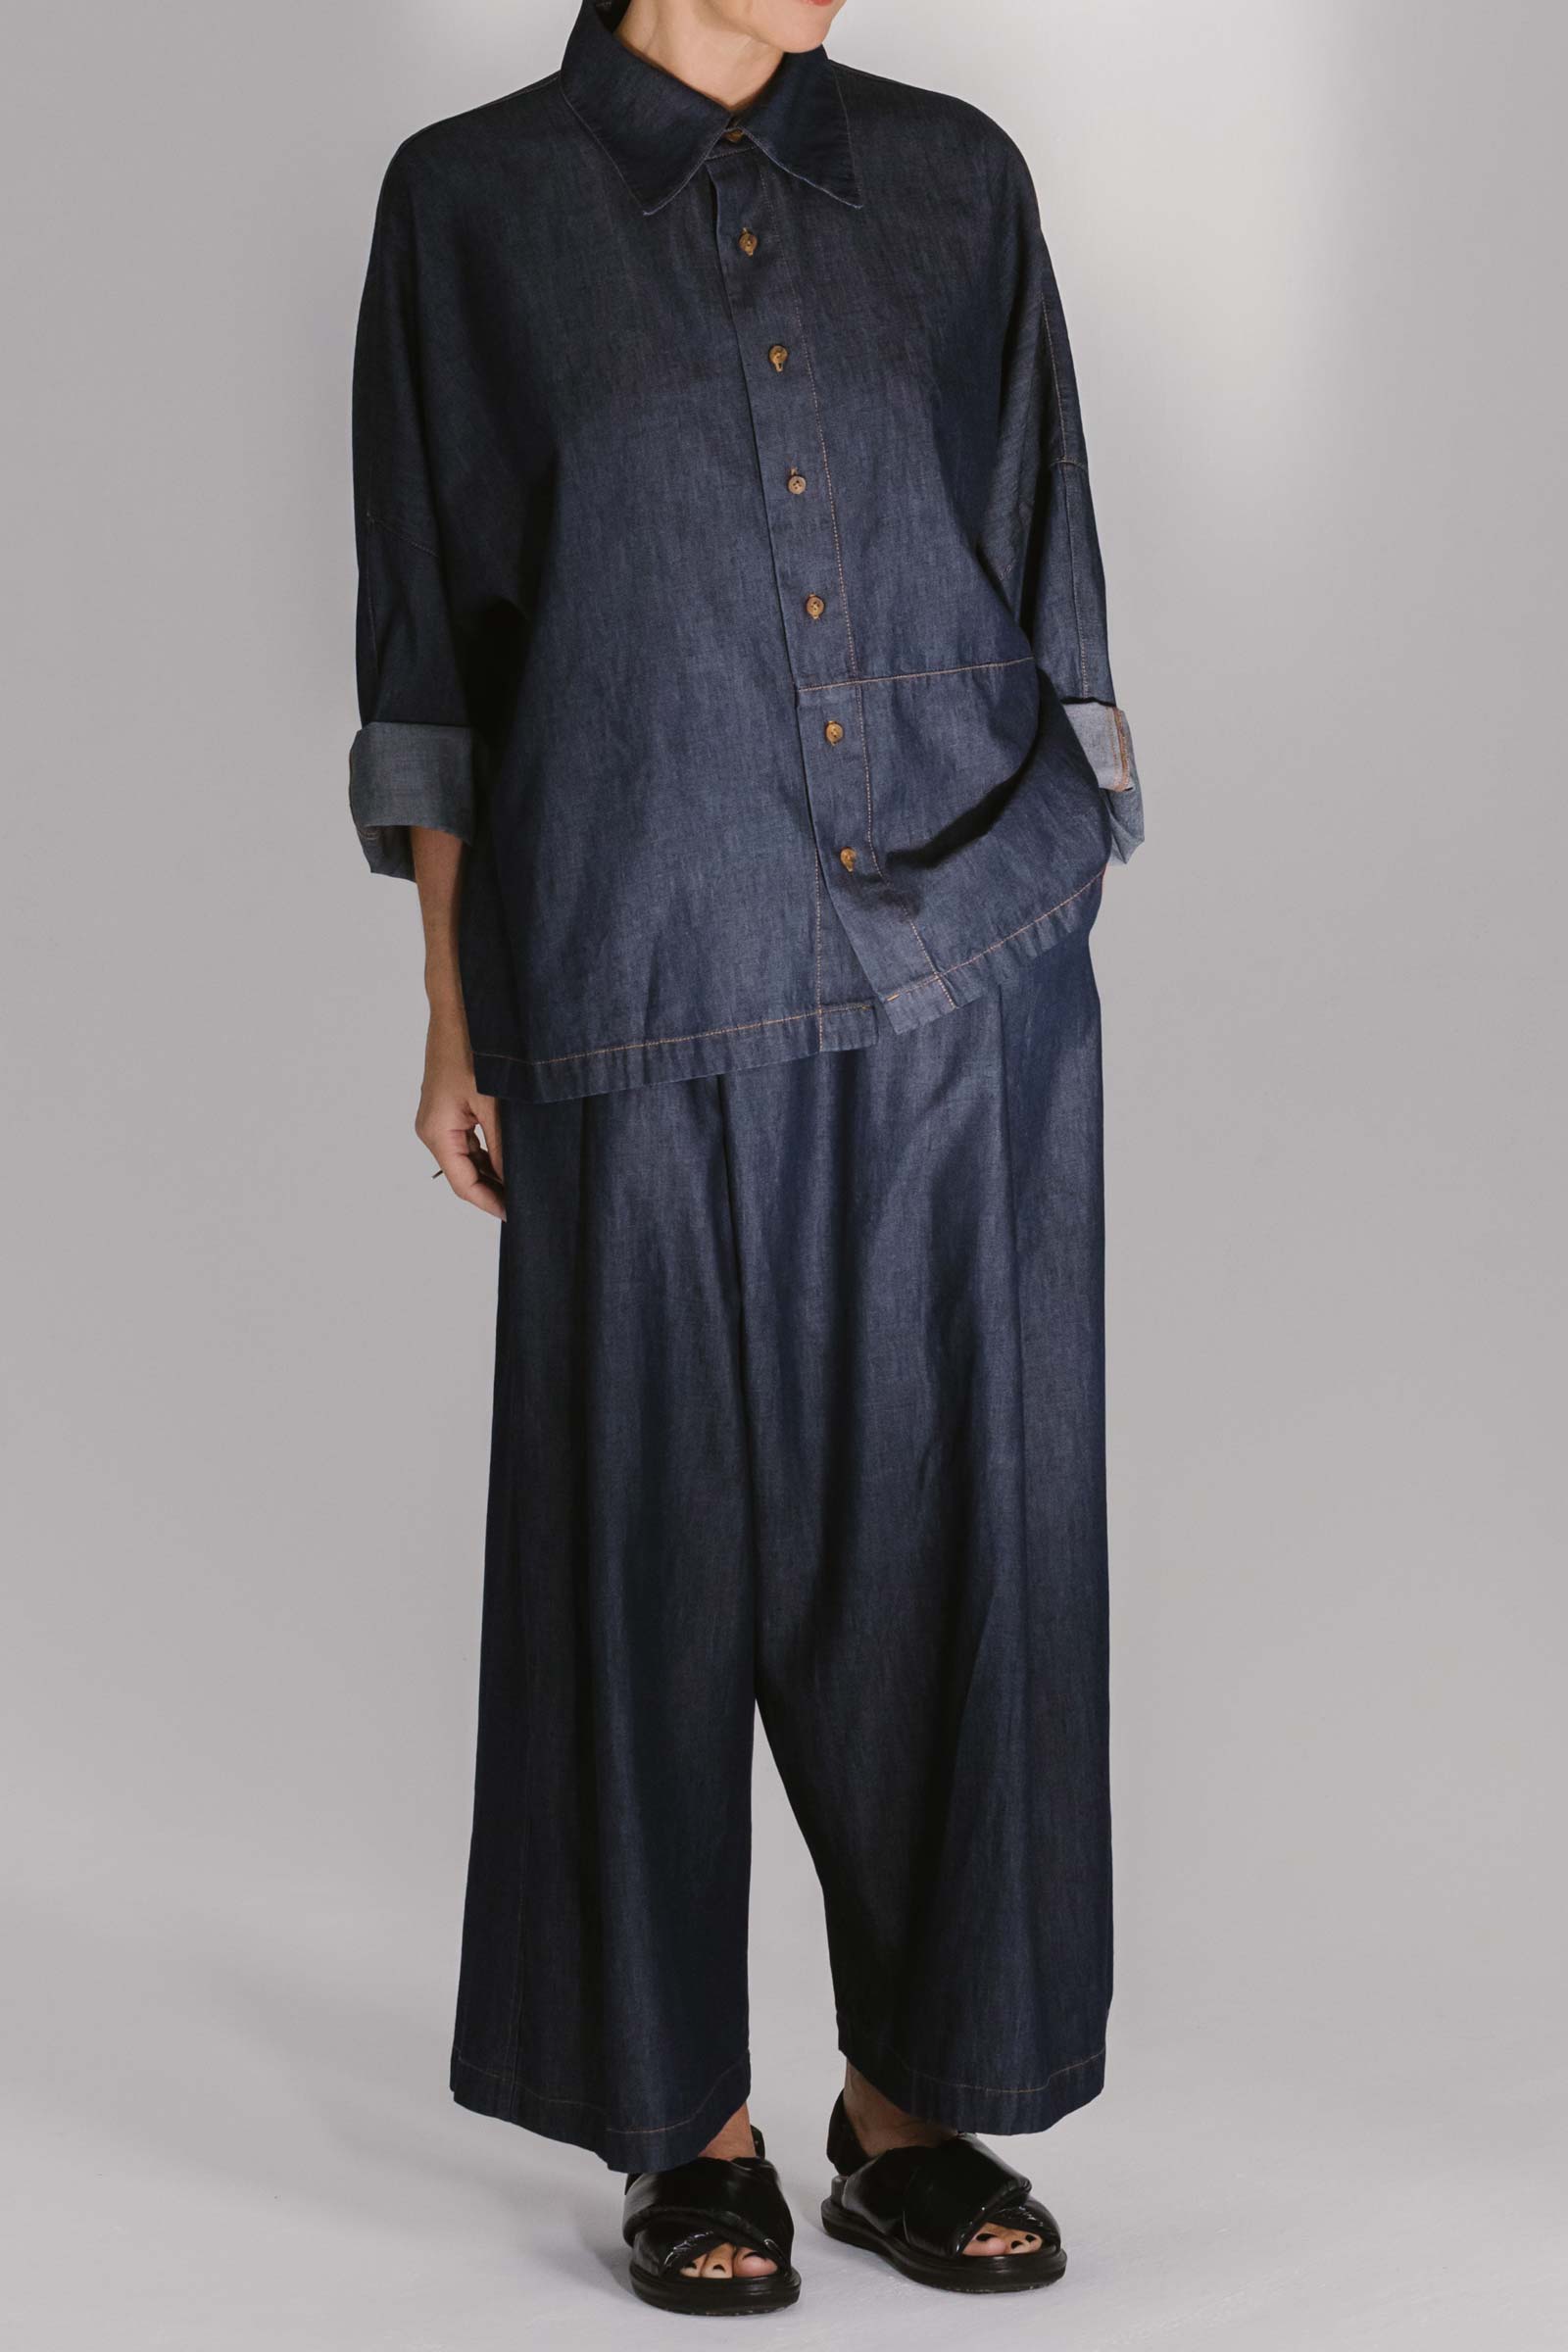  10 to 10 denim trousers and shirt